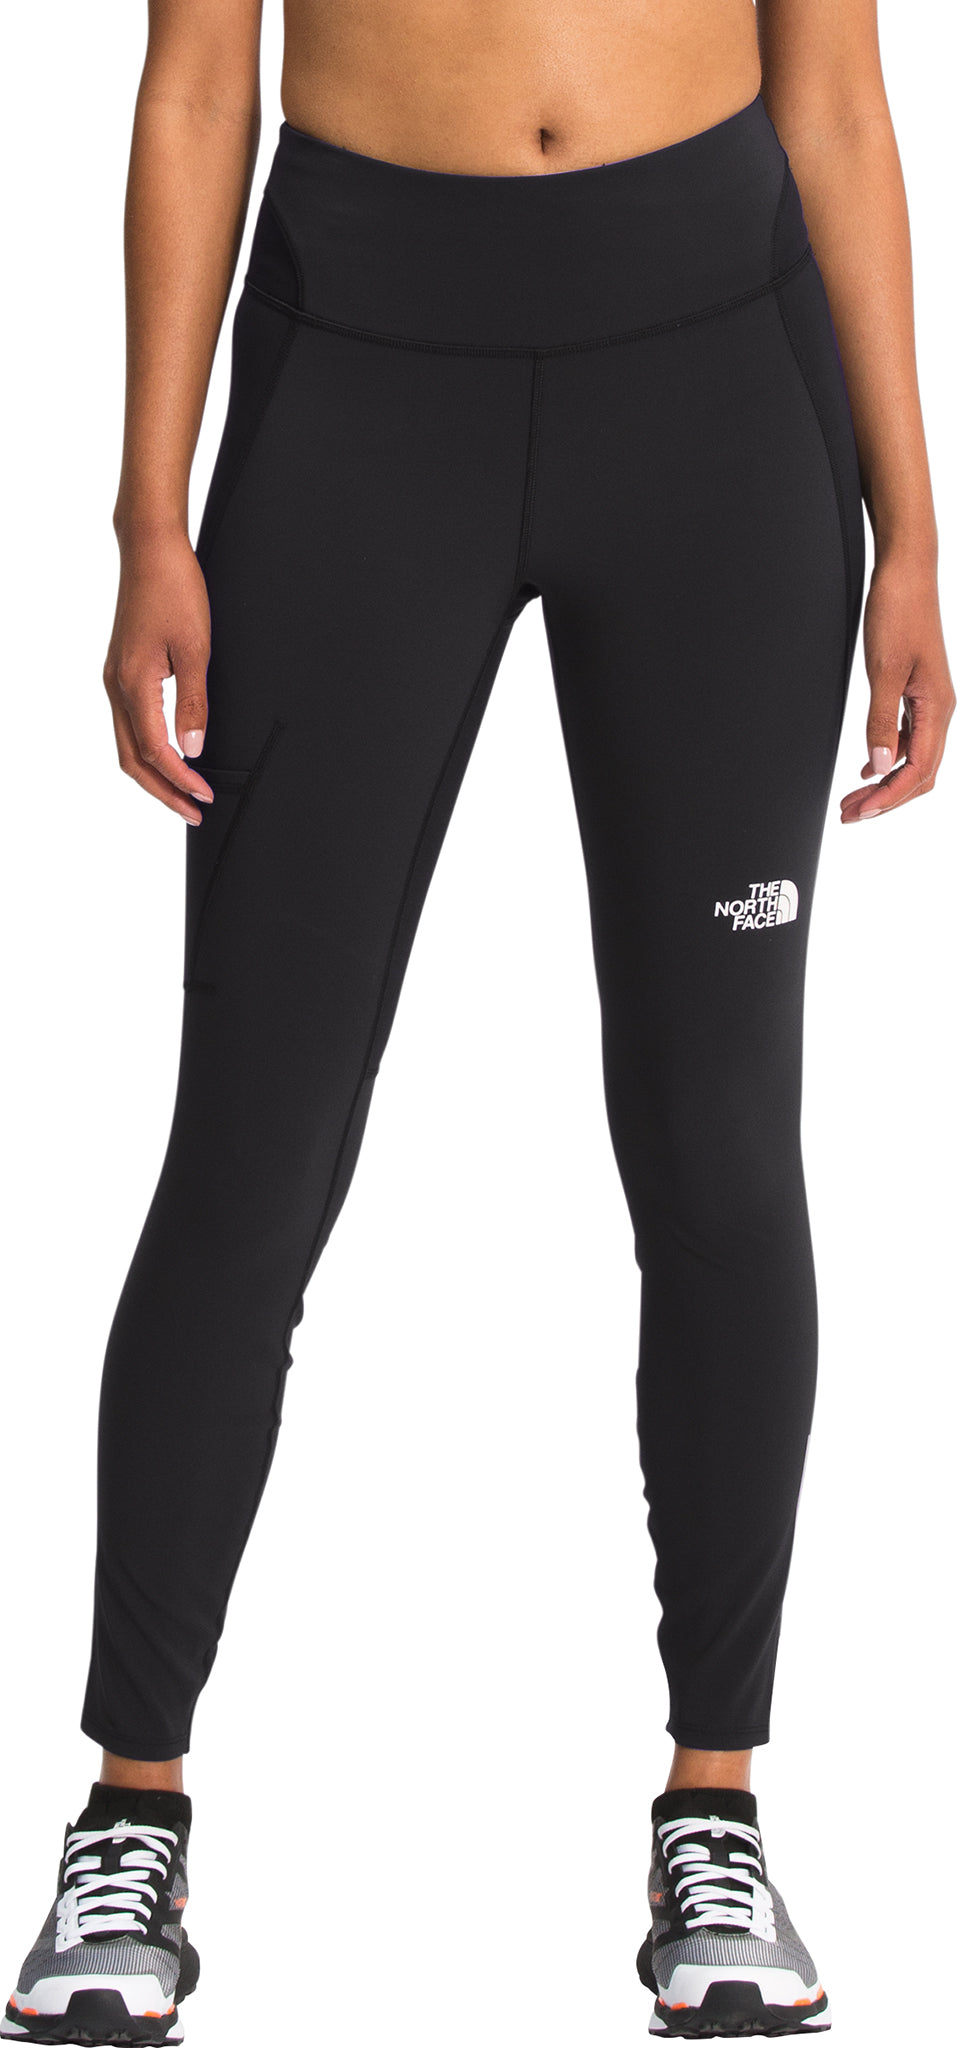 The North Face Winter Warm Tights - Women's